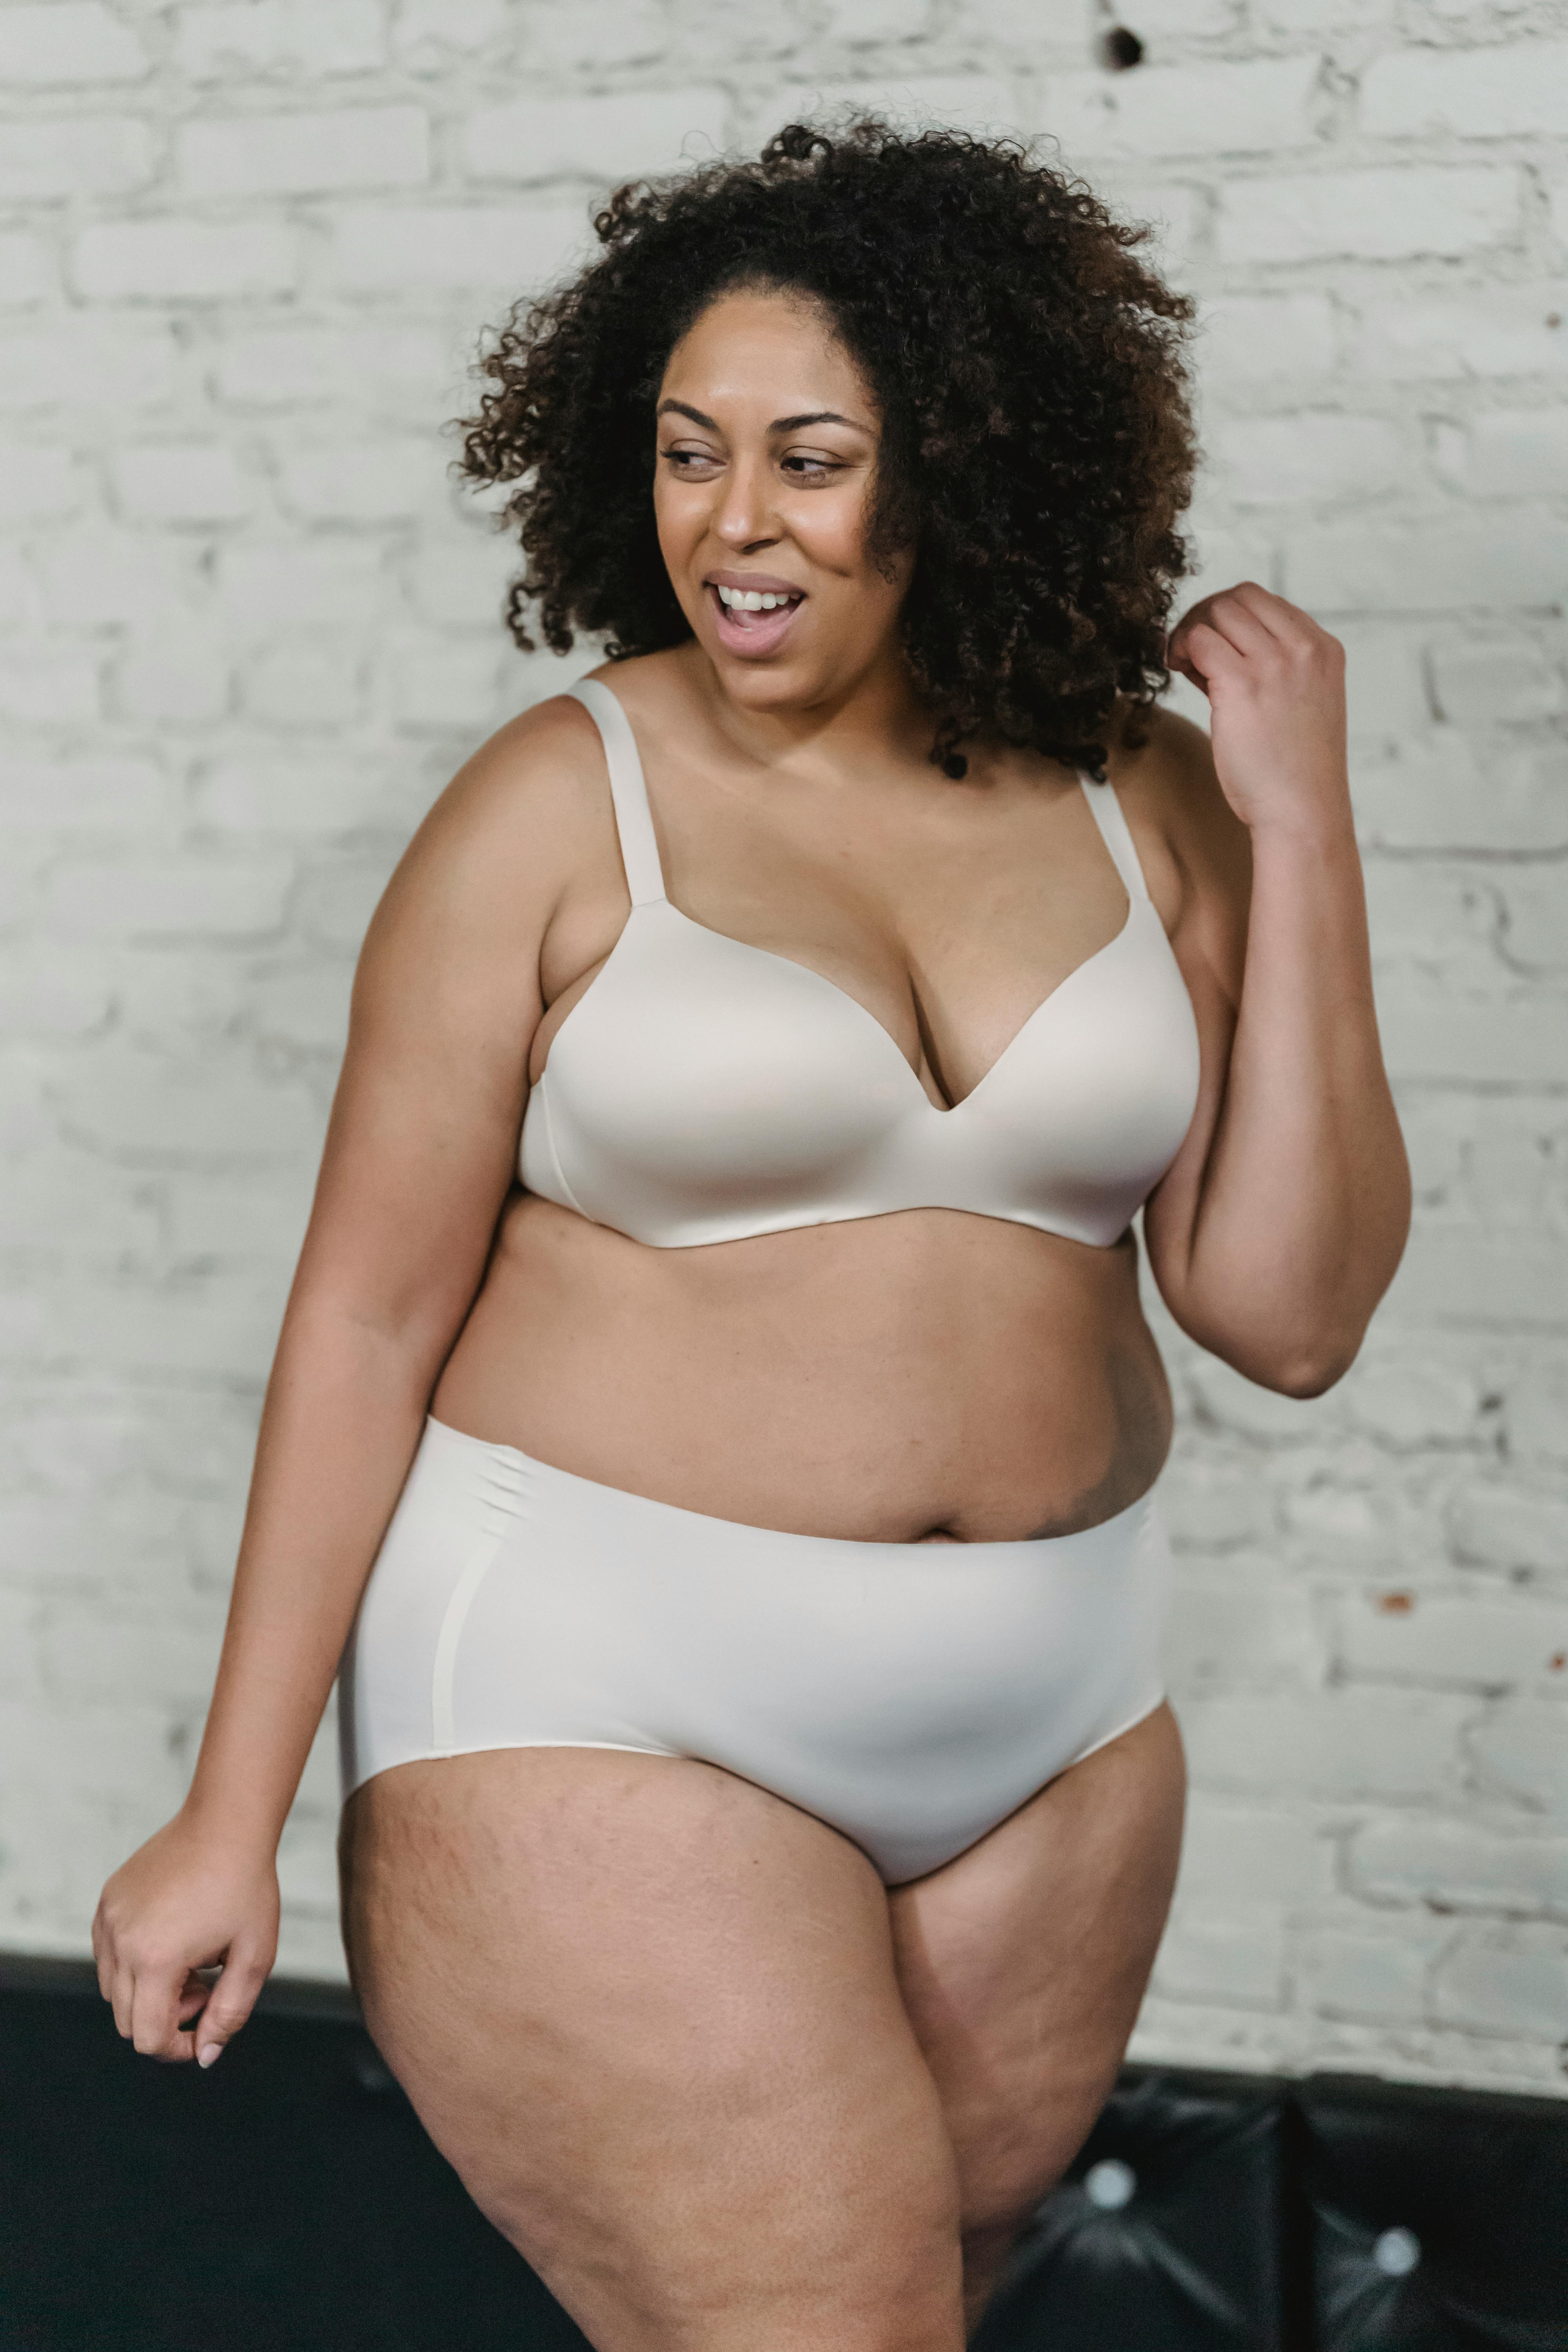 Cheerful plus size African American model in underwear · Free Stock Photo